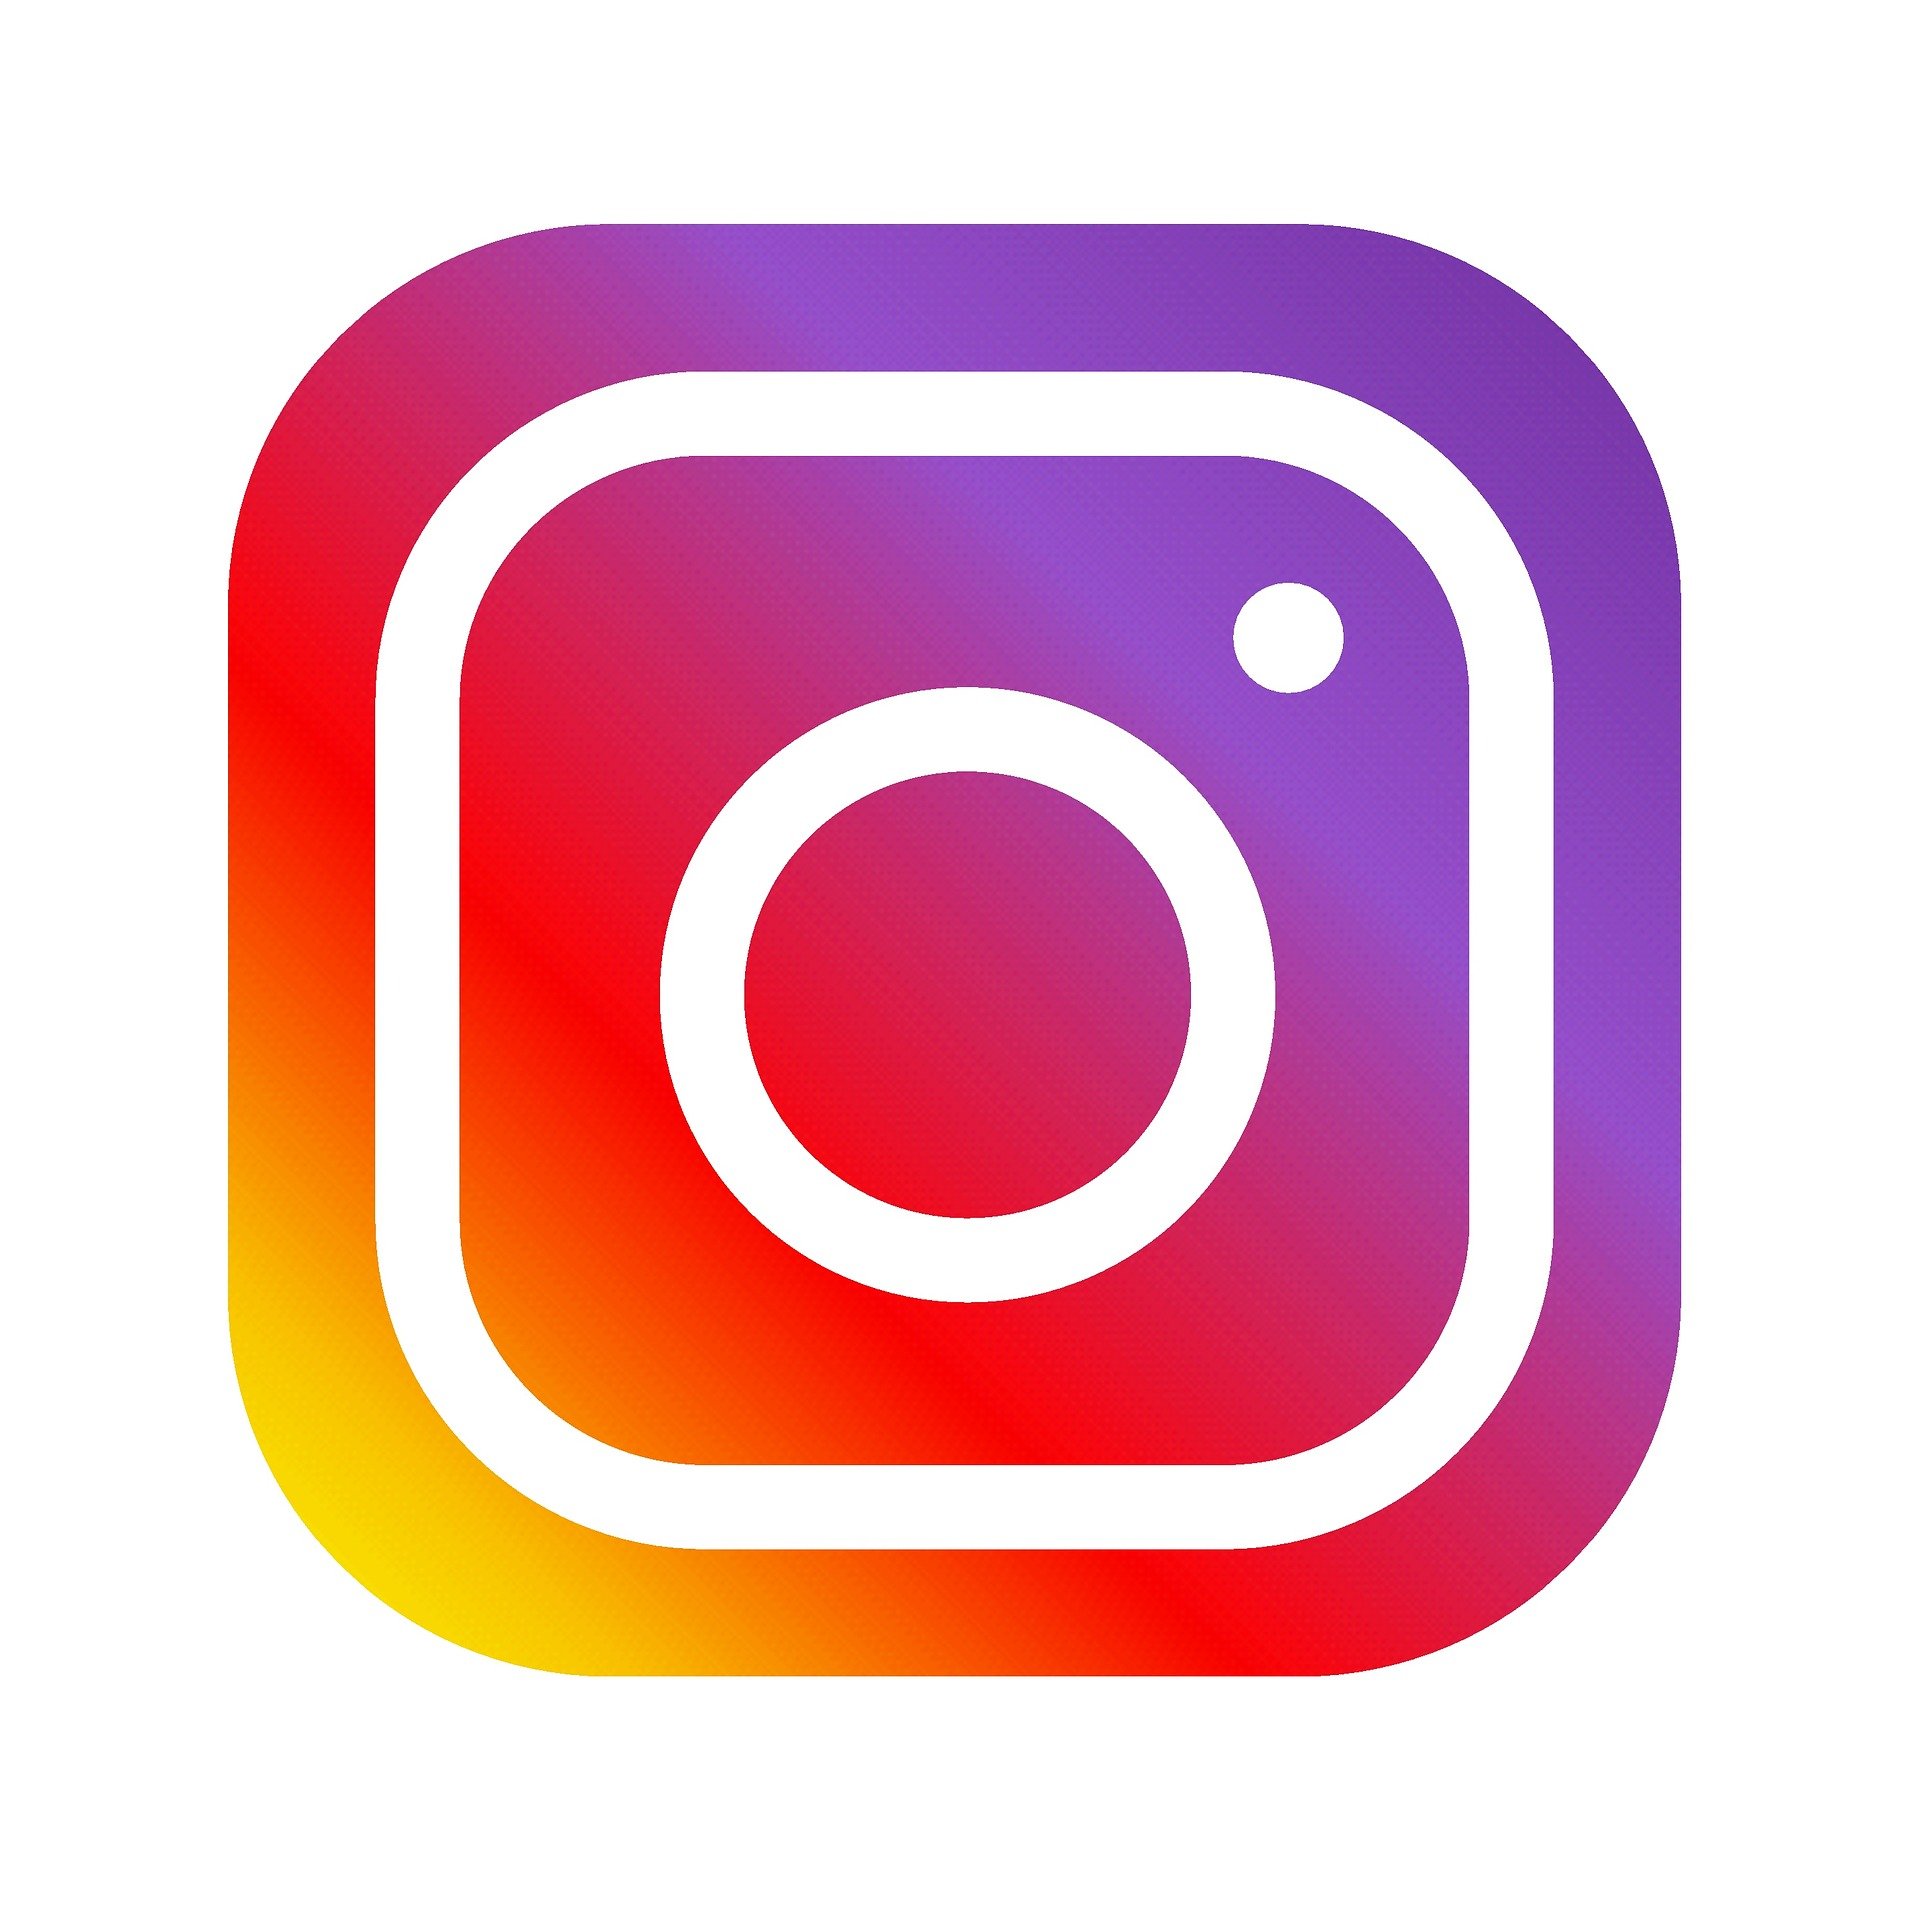 “Favorites” is a New Feature Being Introduced to Instagram